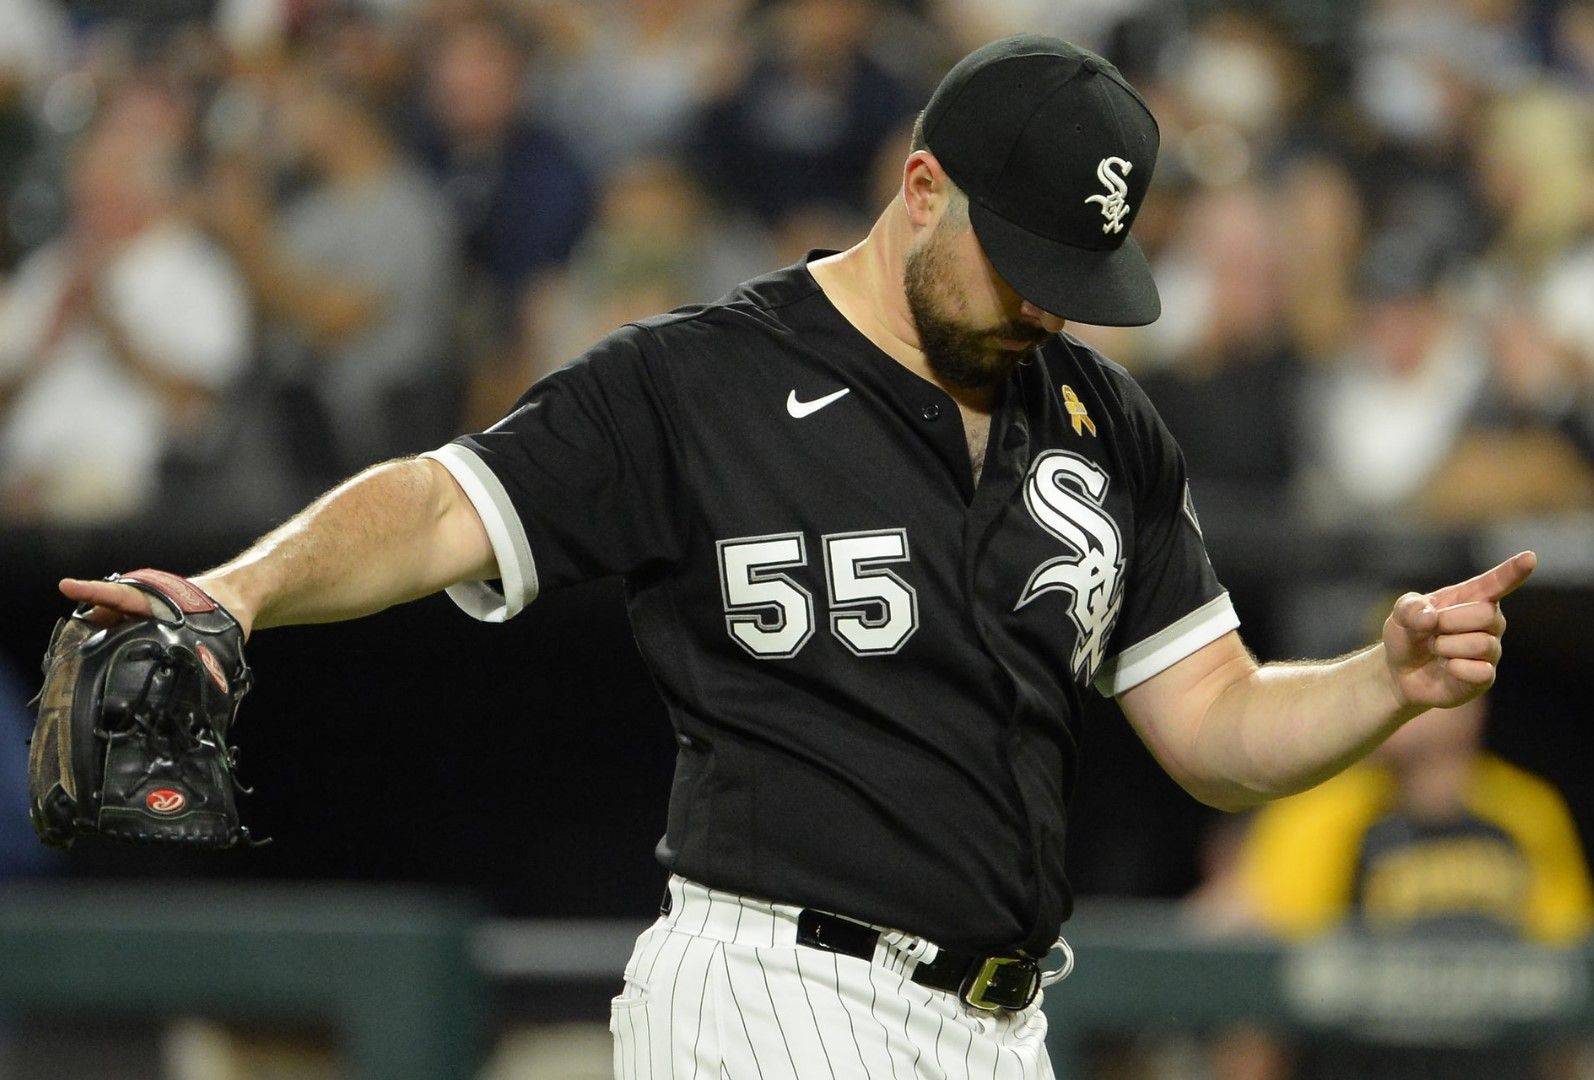 White Sox optimistic Rodon healthy enough for playoffs